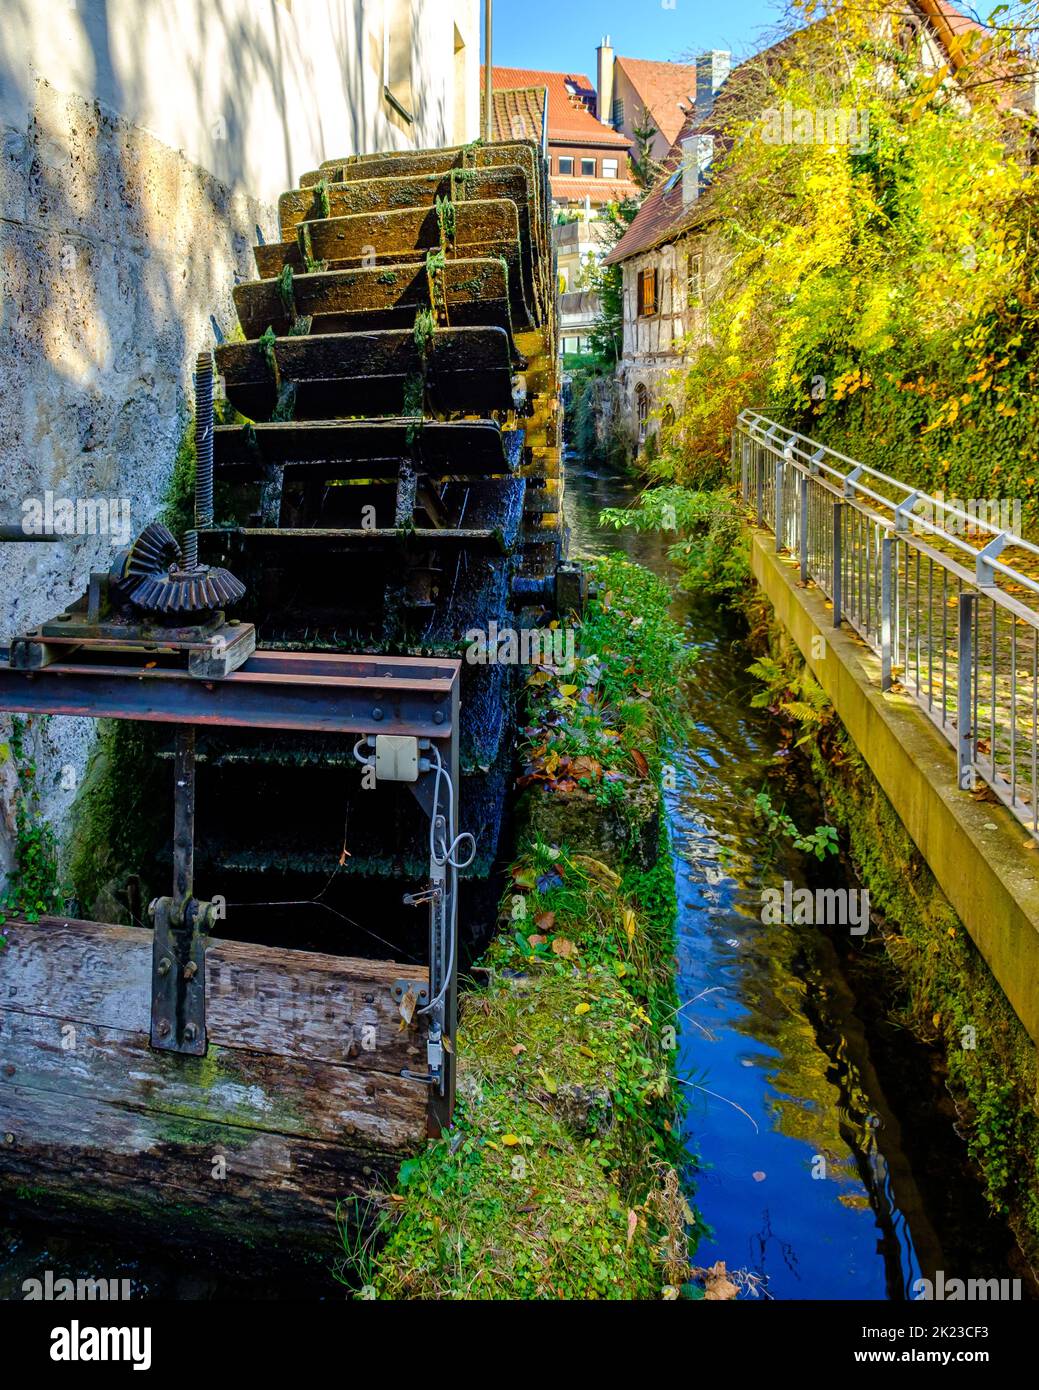 Symbolic image of a historic mill wheel and the concept of water energy and sustainability. Stock Photo